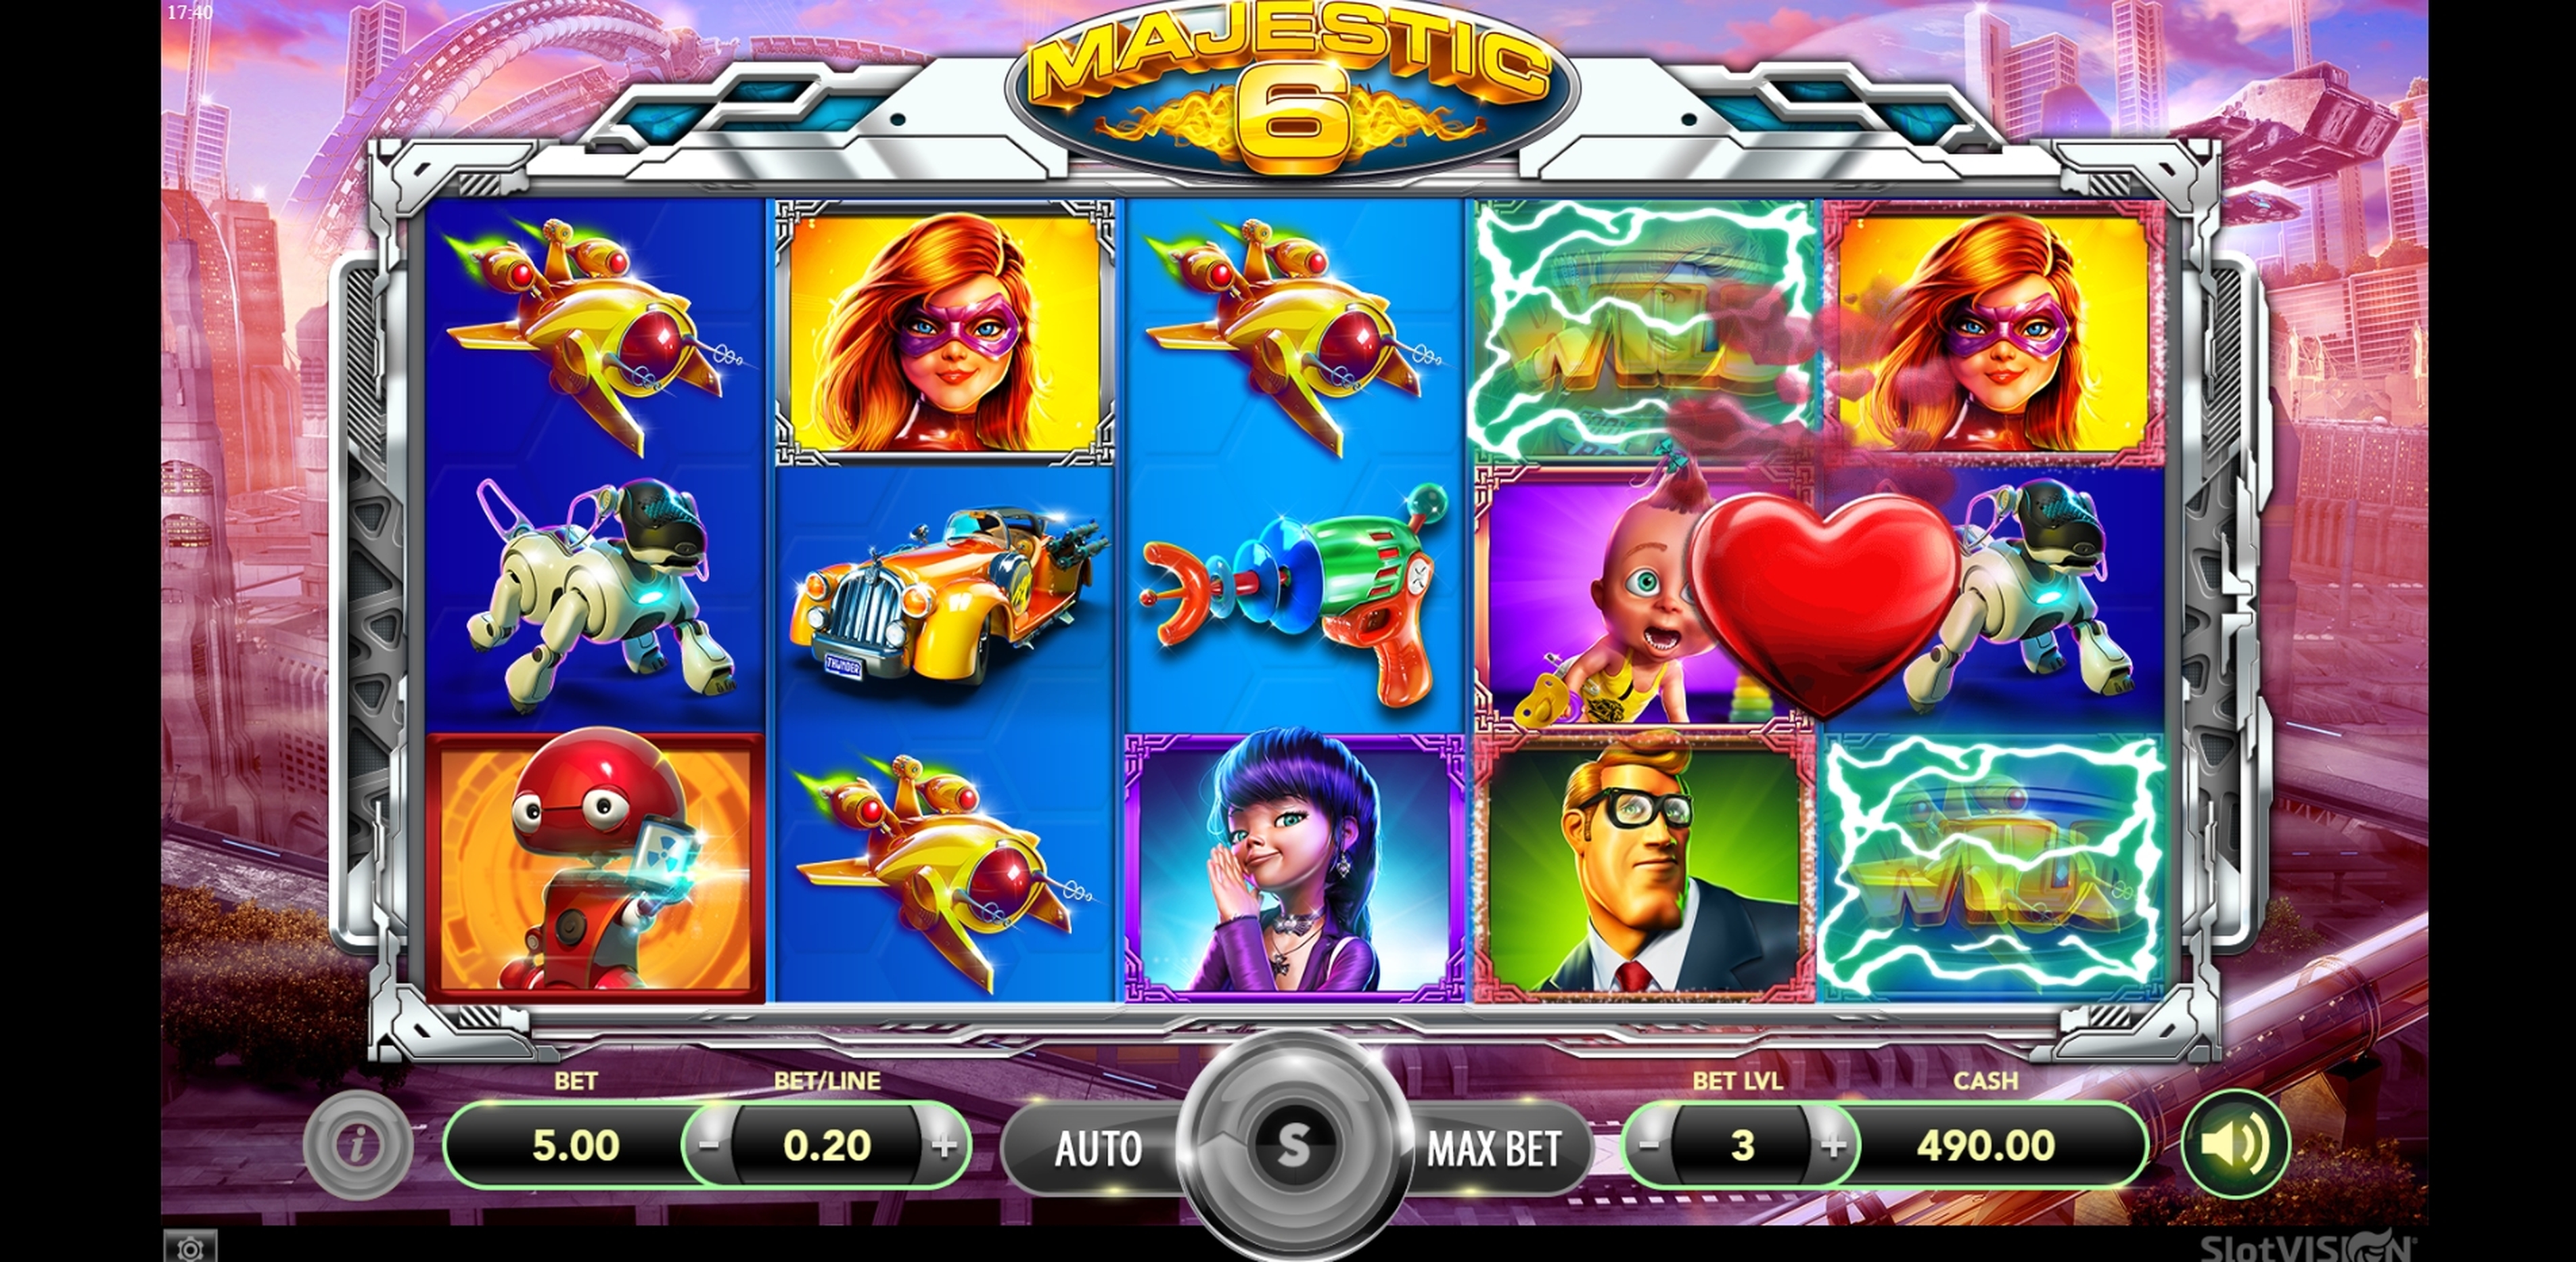 Win Money in Majestic 6 Free Slot Game by SlotVision